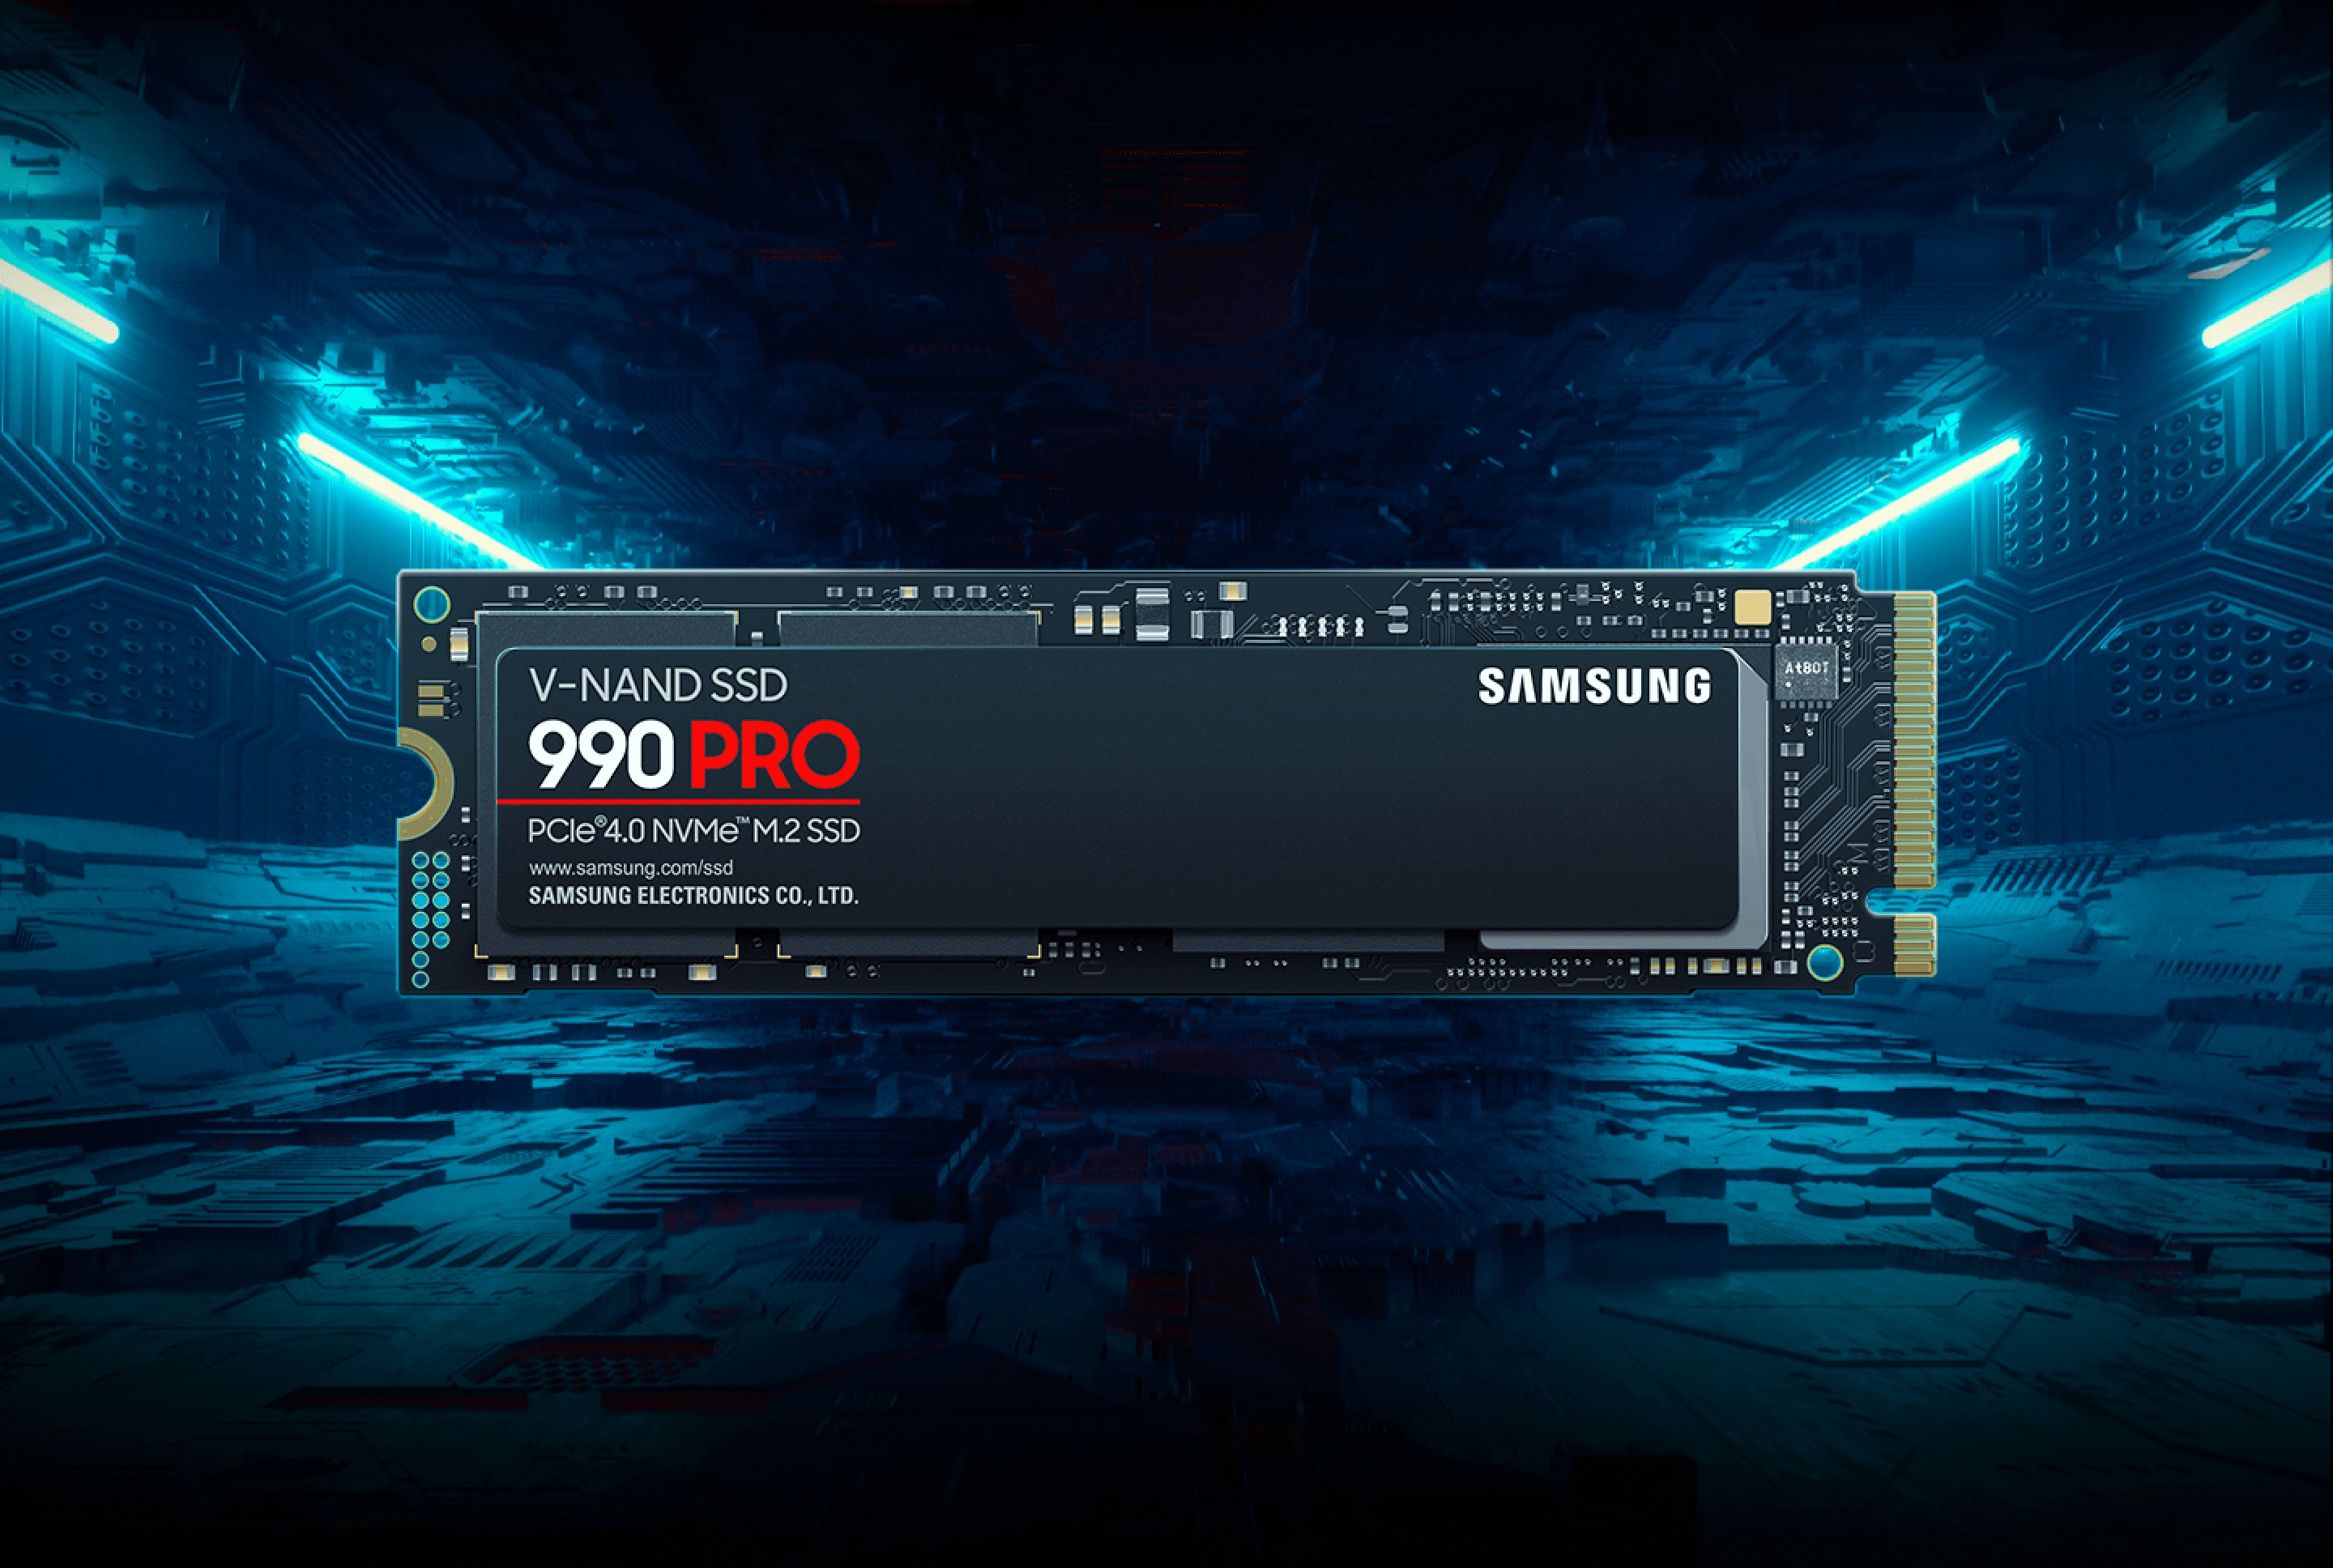 It is an image with the 990 PRO product in the center on the background of ouSamsung Semiconductor 990 PRO PCIe 4.0 NVMe M.2 V-NAND SSD